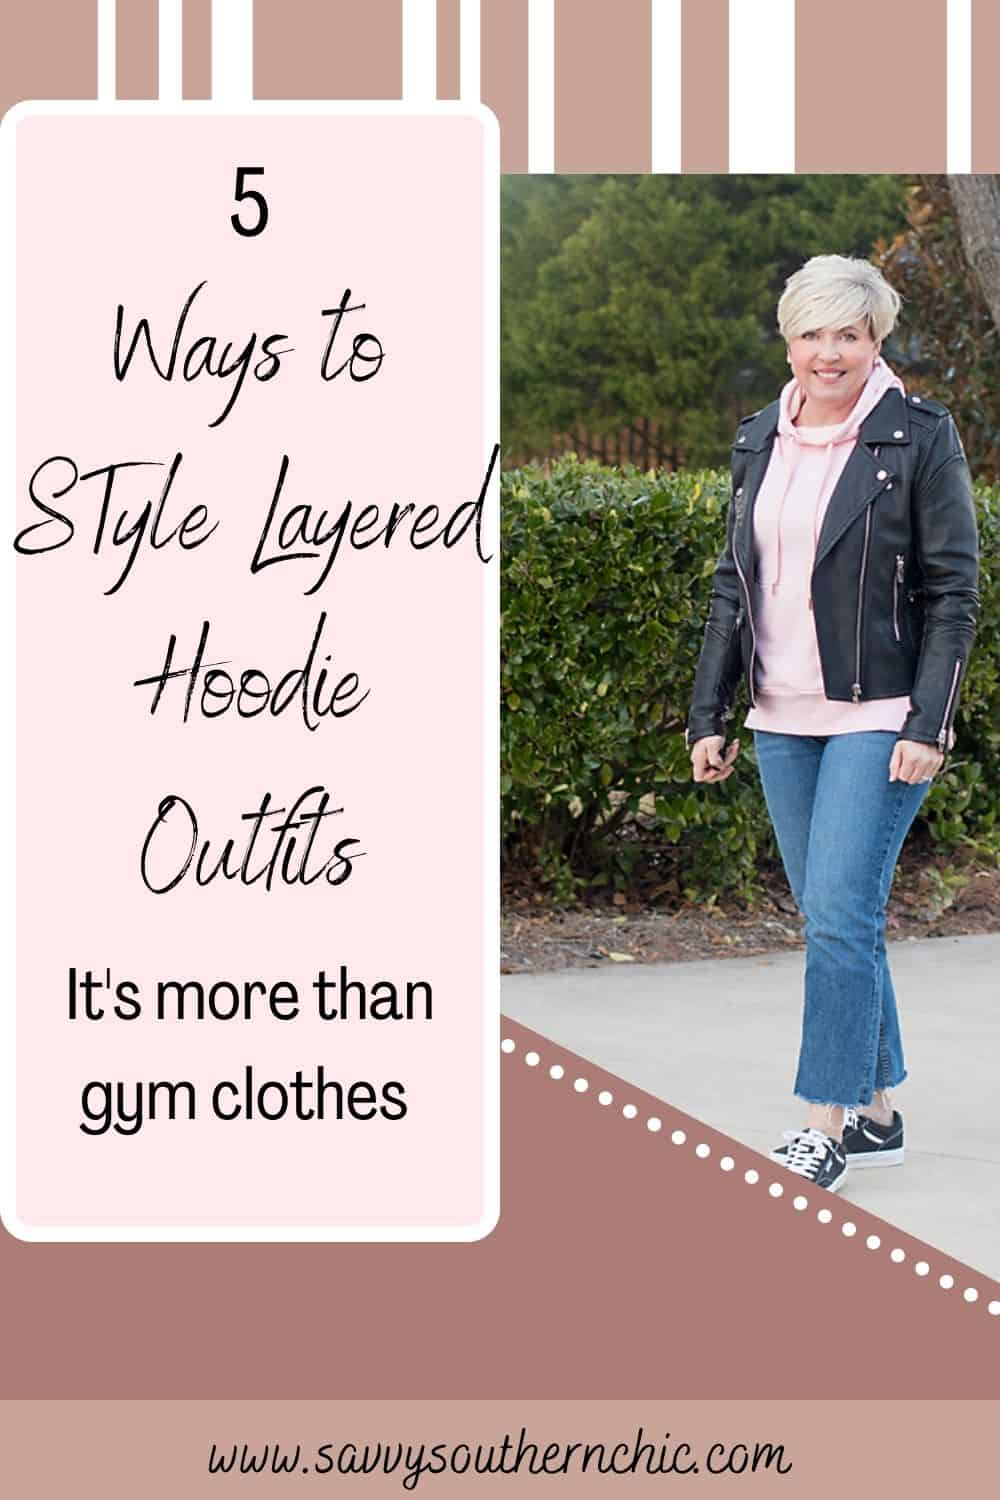 5 ways to style layered hoodie outfits